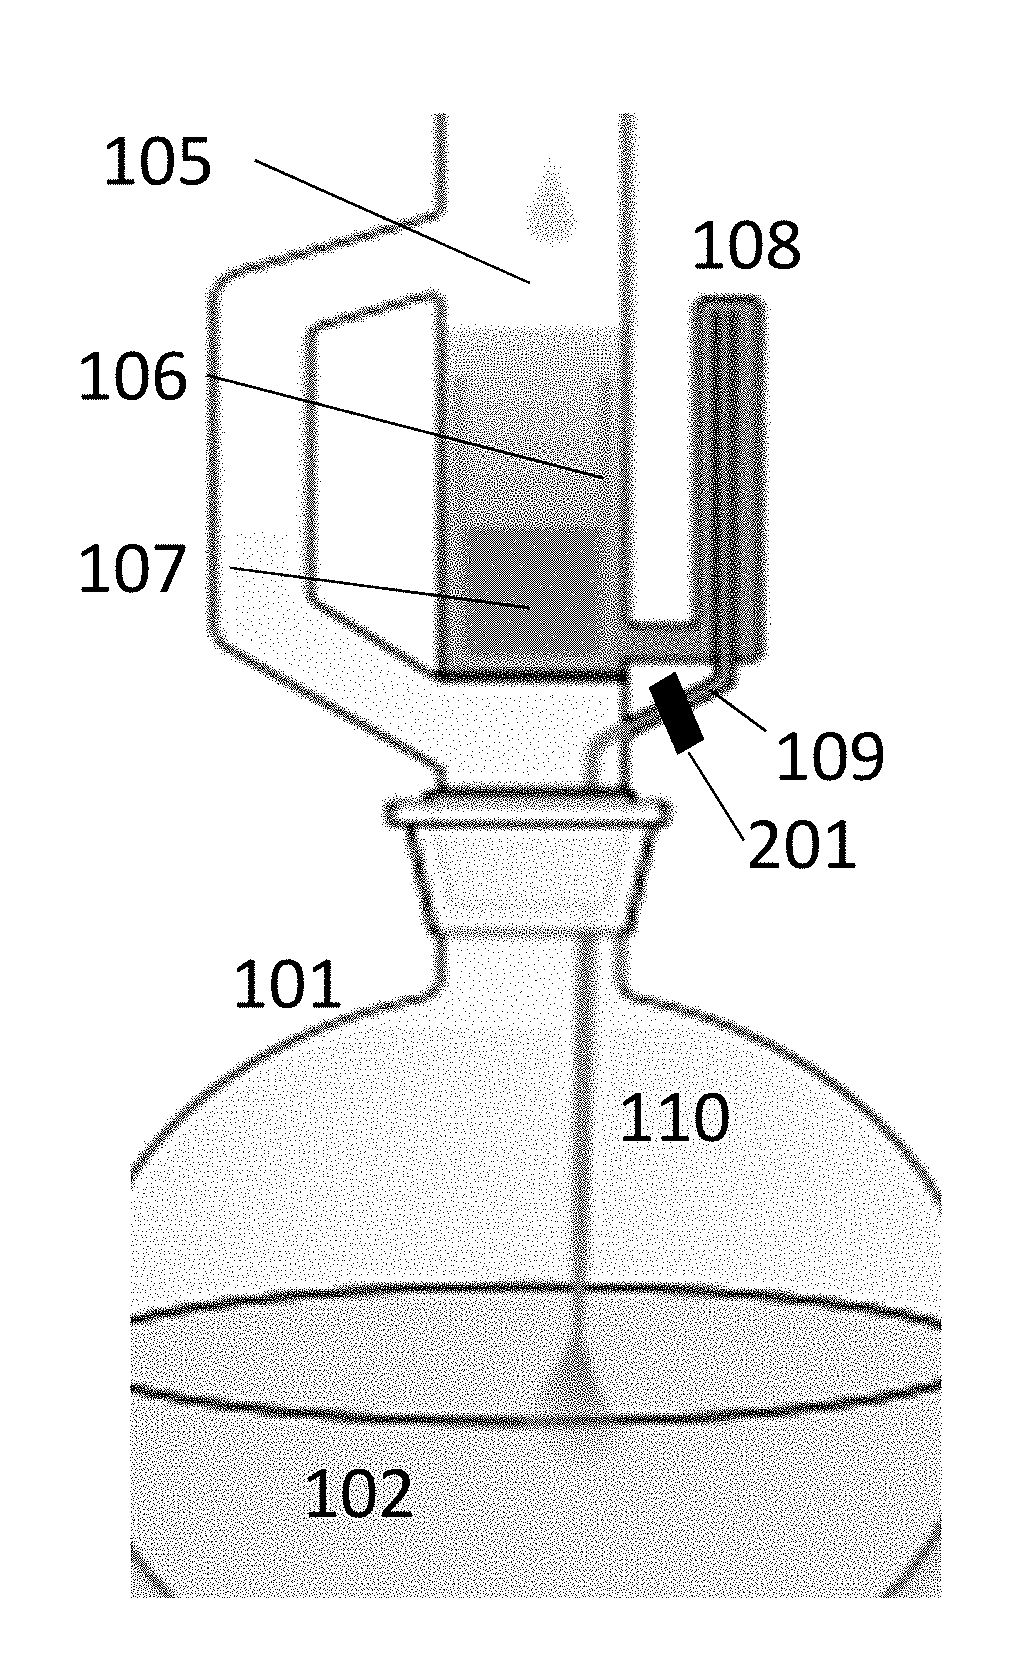 Device, system and method for in-situ optical monitoring and control of extraction and purification of plant materials